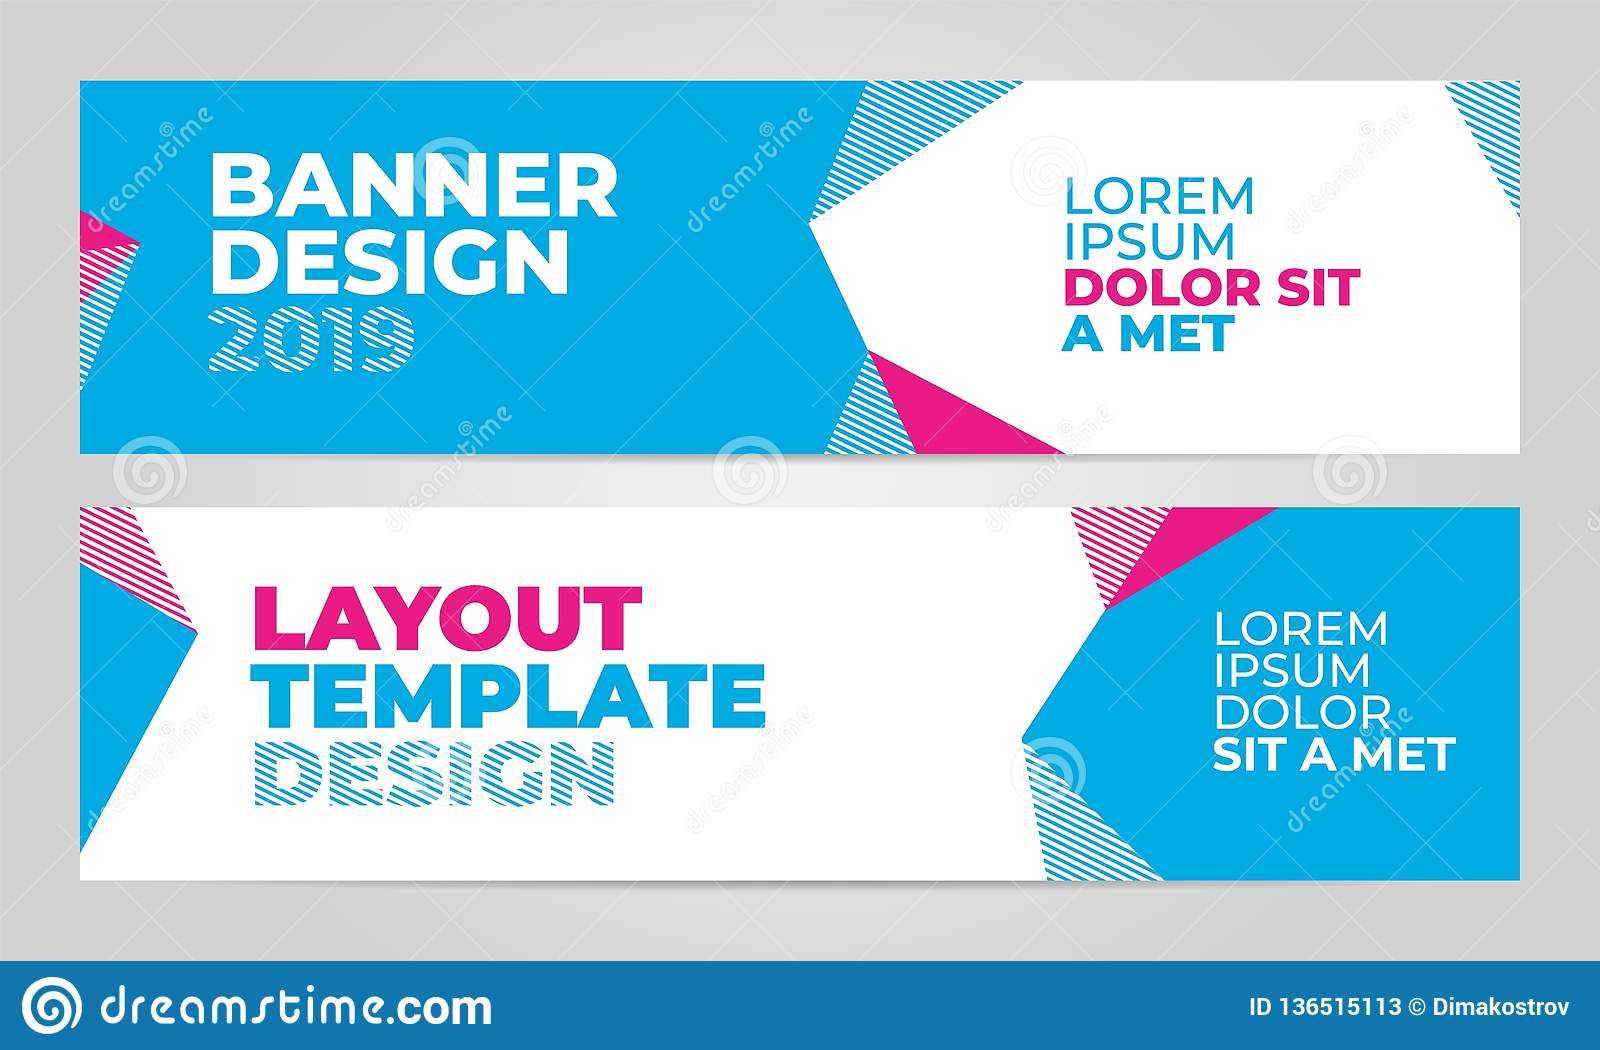 Layout Banner Template Design For Winter Sport Event 2019 With Event Banner Template